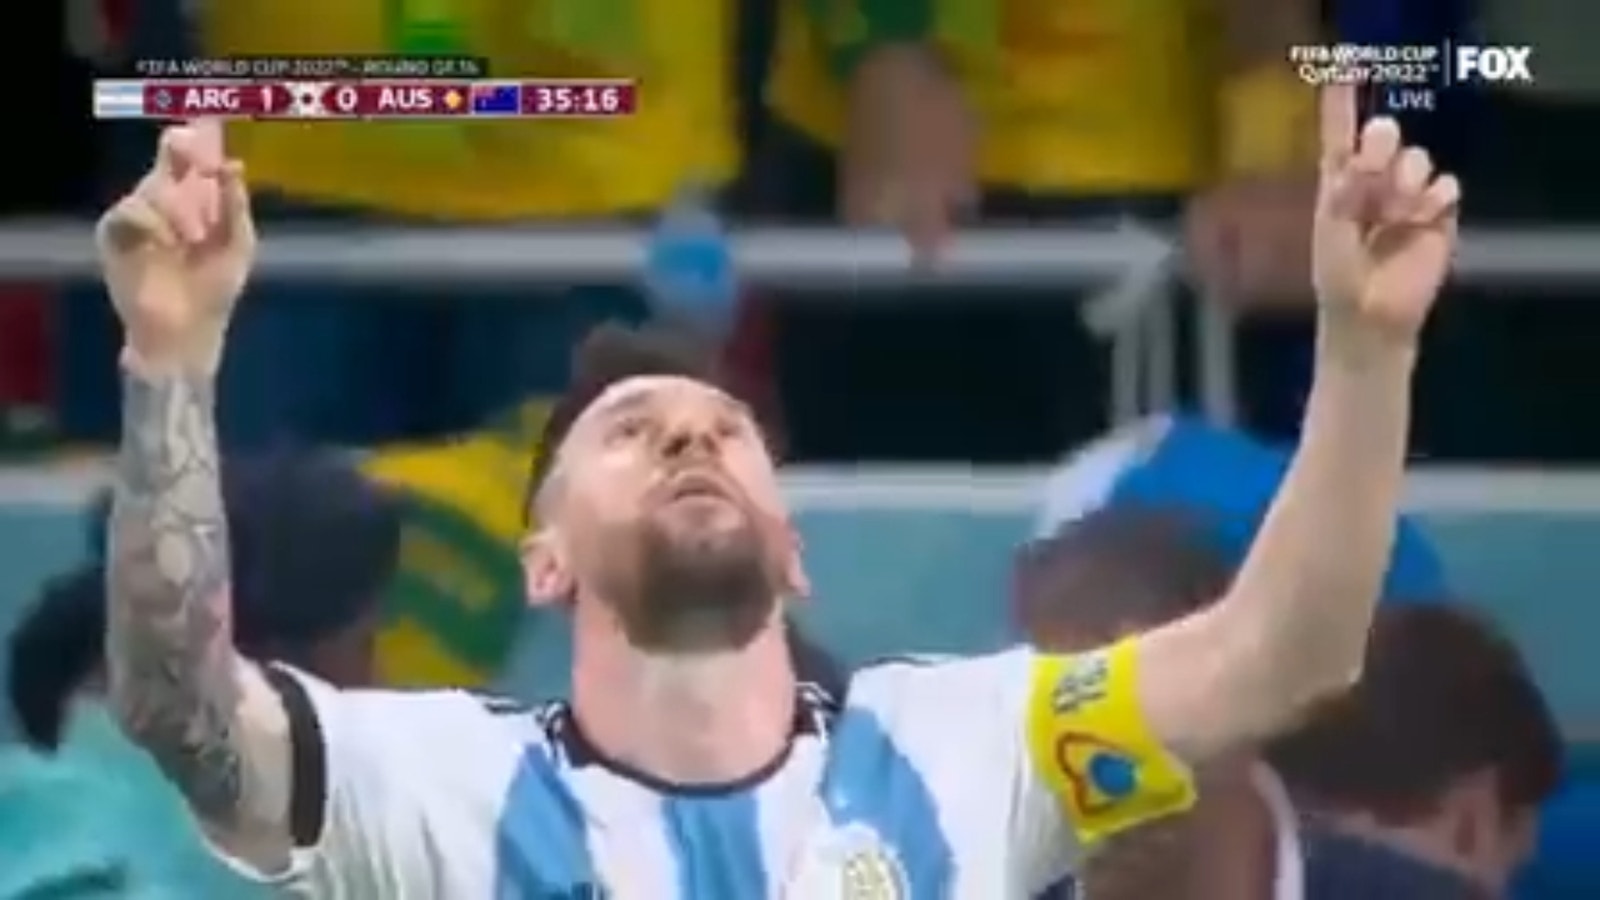 Lionel Messi puts Argentina on the board in the 35'